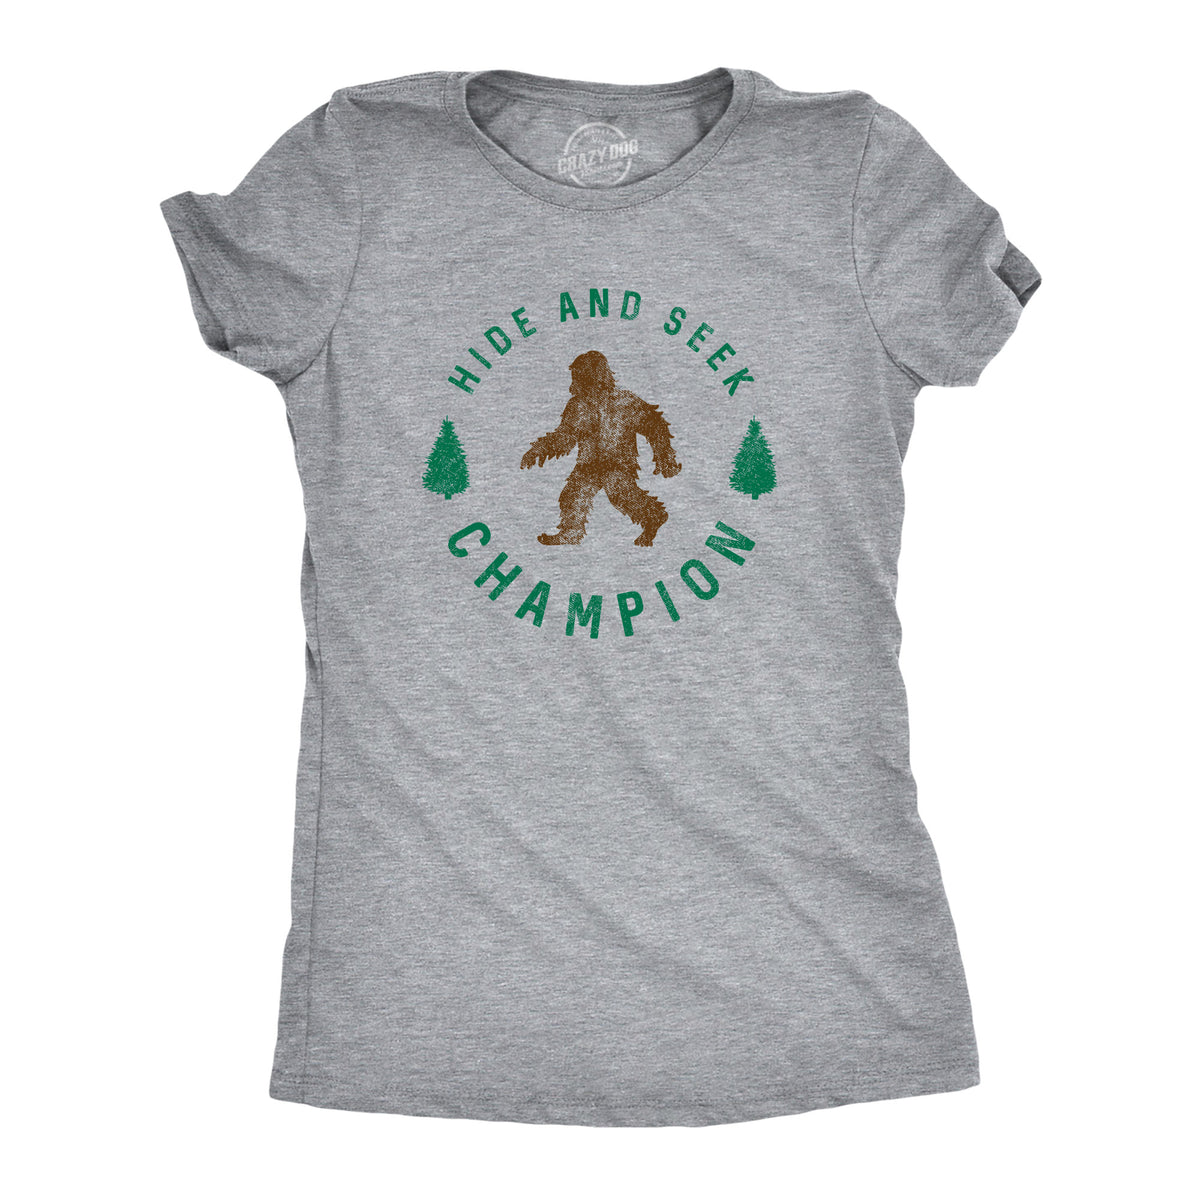 Funny Light Heather Grey - 2 Color Print Hide And Seek Champion Womens T Shirt Nerdy camping Tee